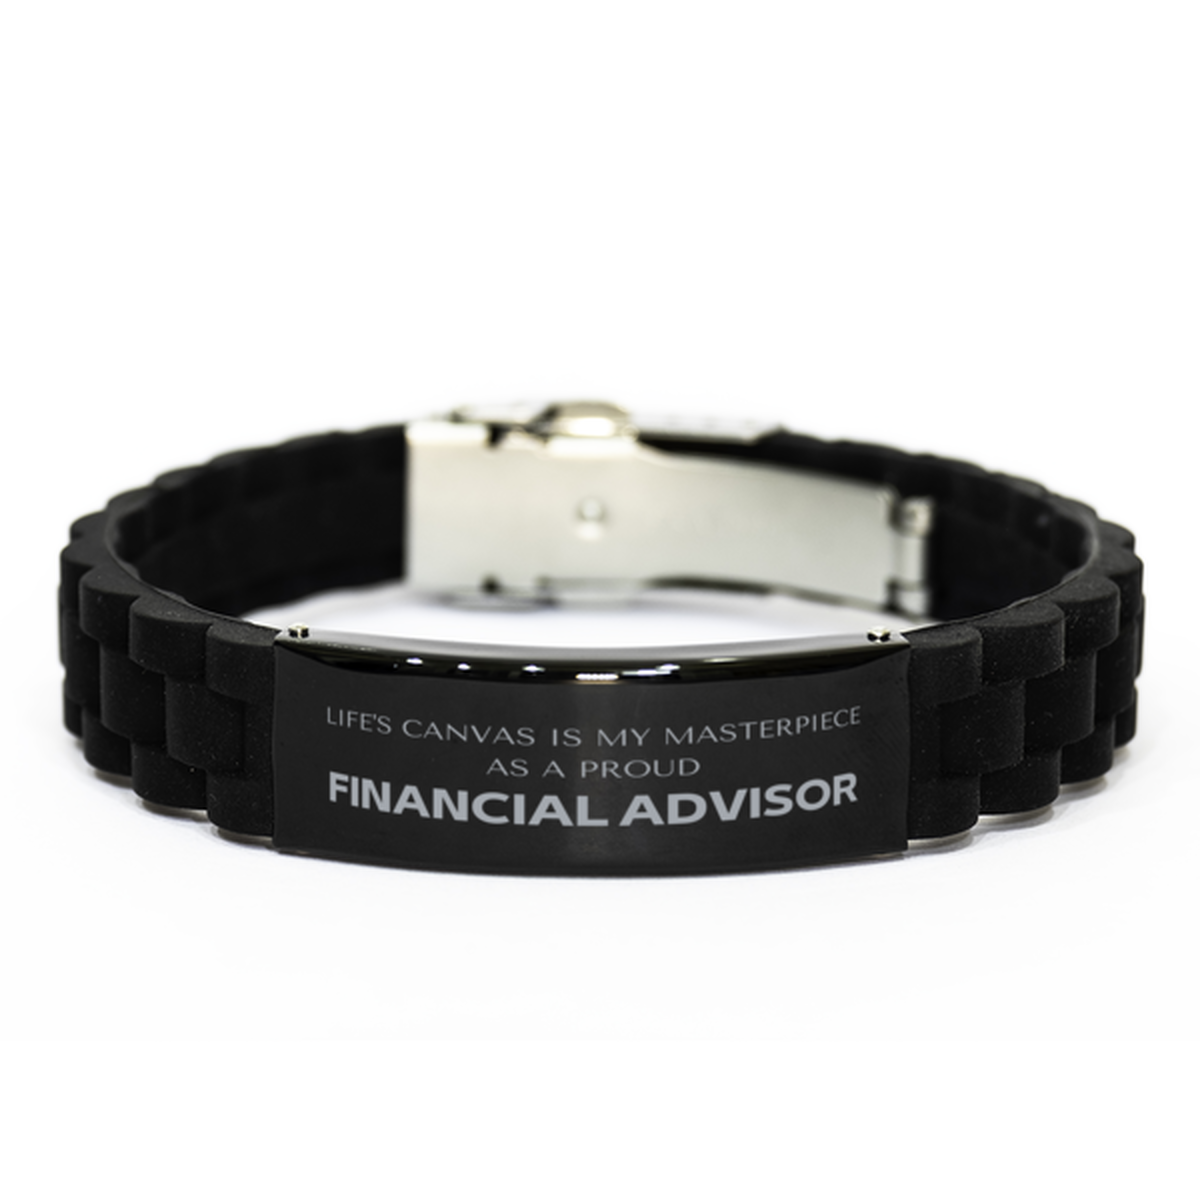 Proud Financial Advisor Gifts, Life's canvas is my masterpiece, Epic Birthday Christmas Unique Black Glidelock Clasp Bracelet For Financial Advisor, Coworkers, Men, Women, Friends